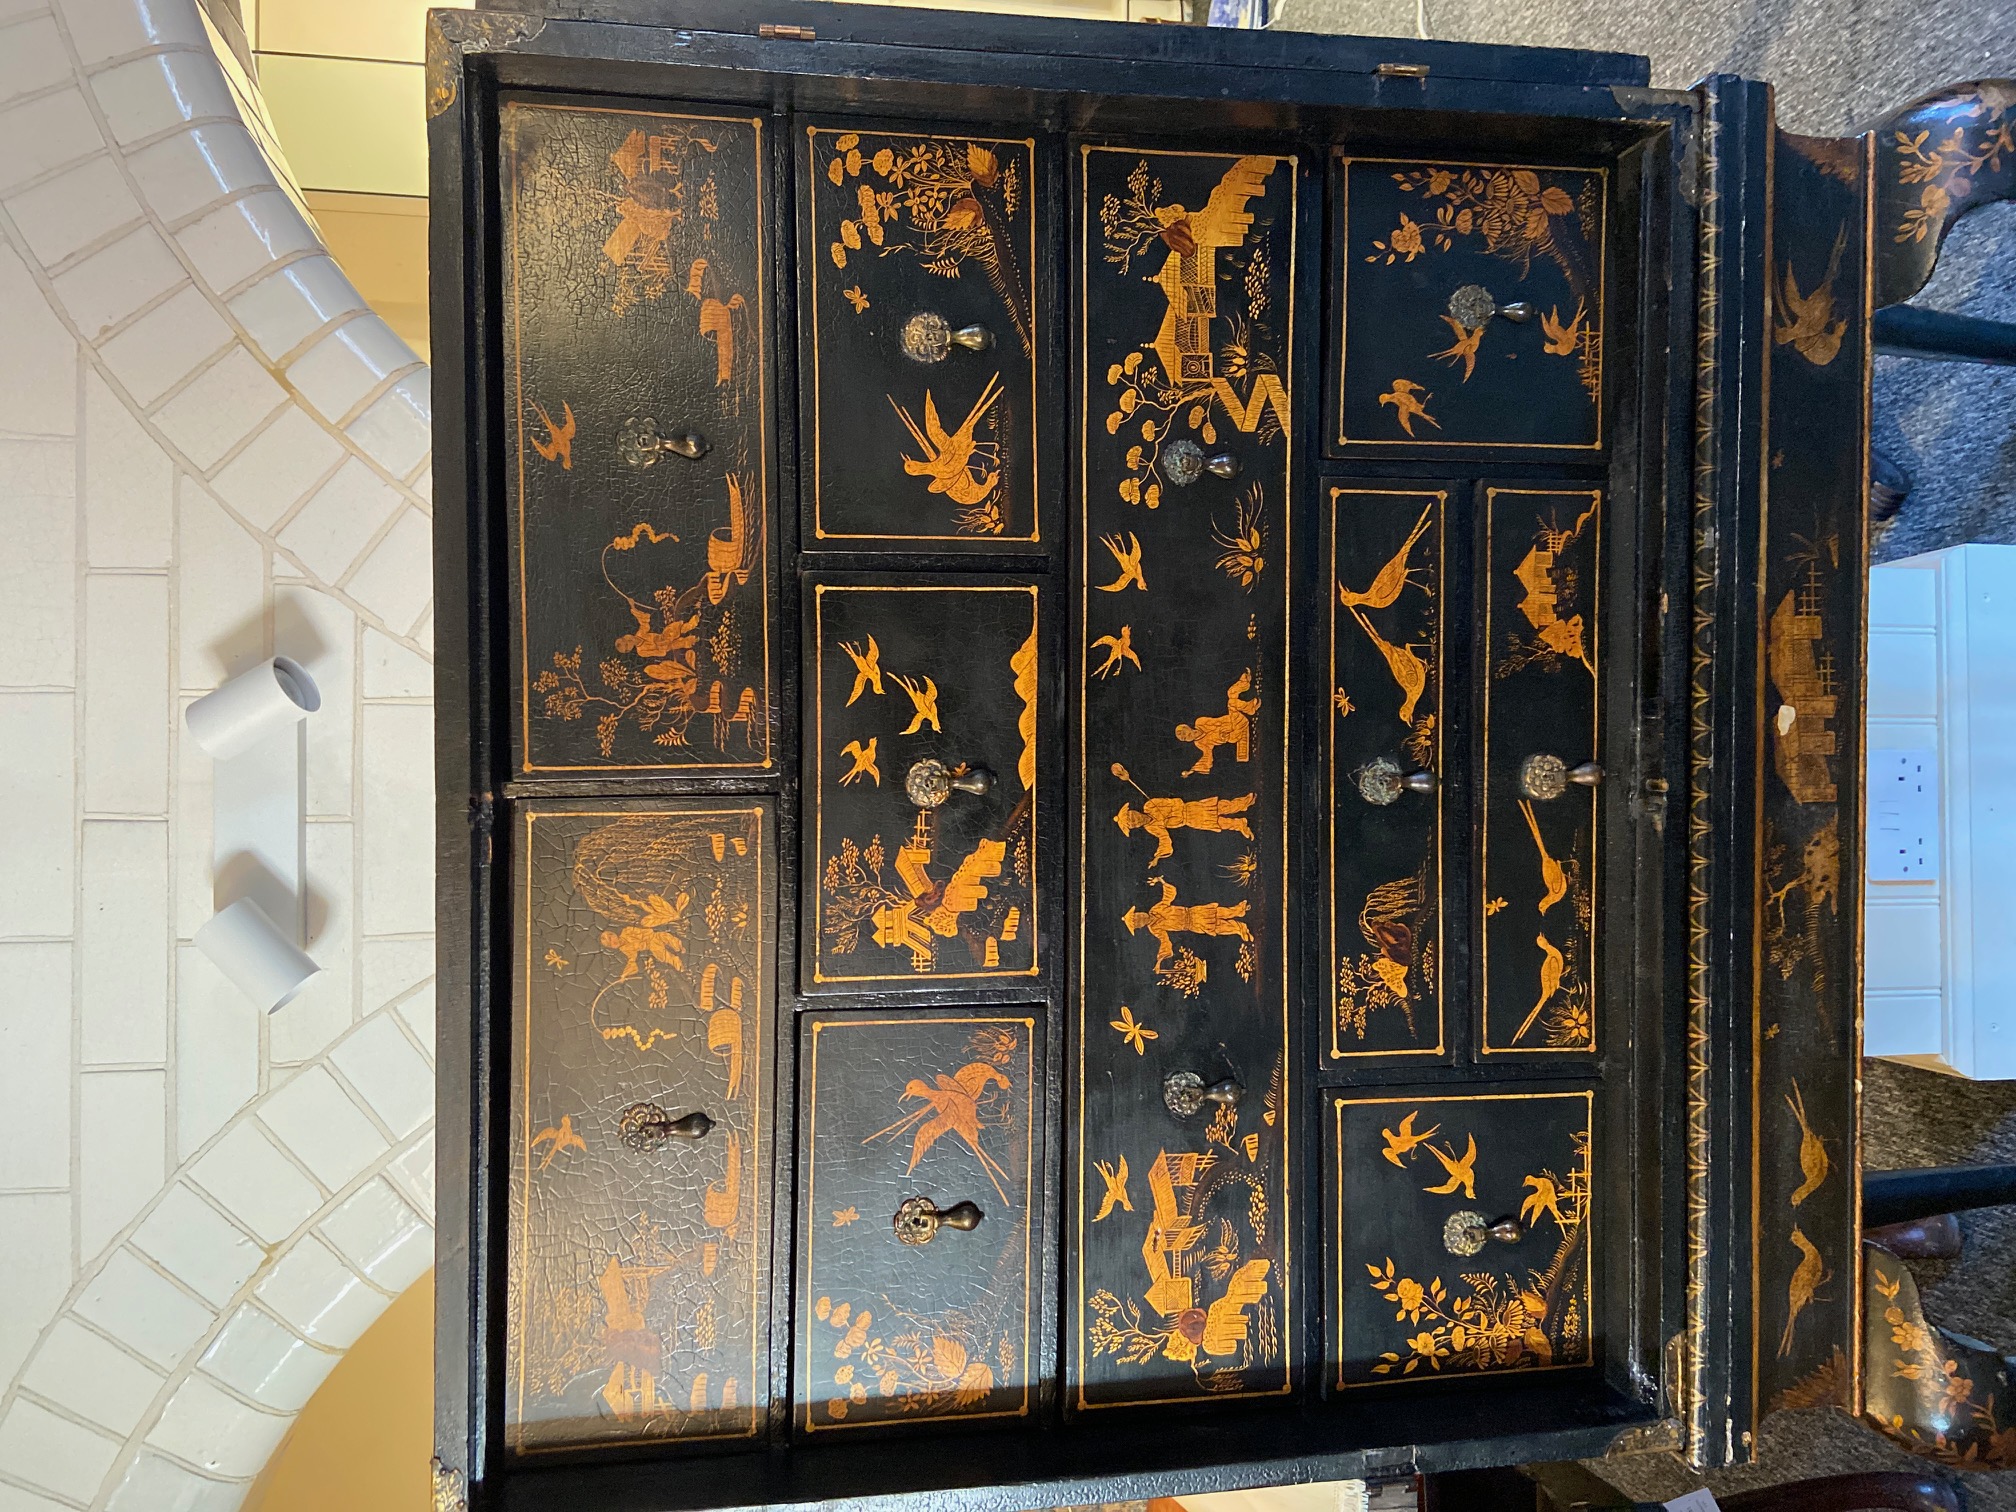 An early 18th century Chinese export black lacquer cabinet on a European stand - Image 27 of 36